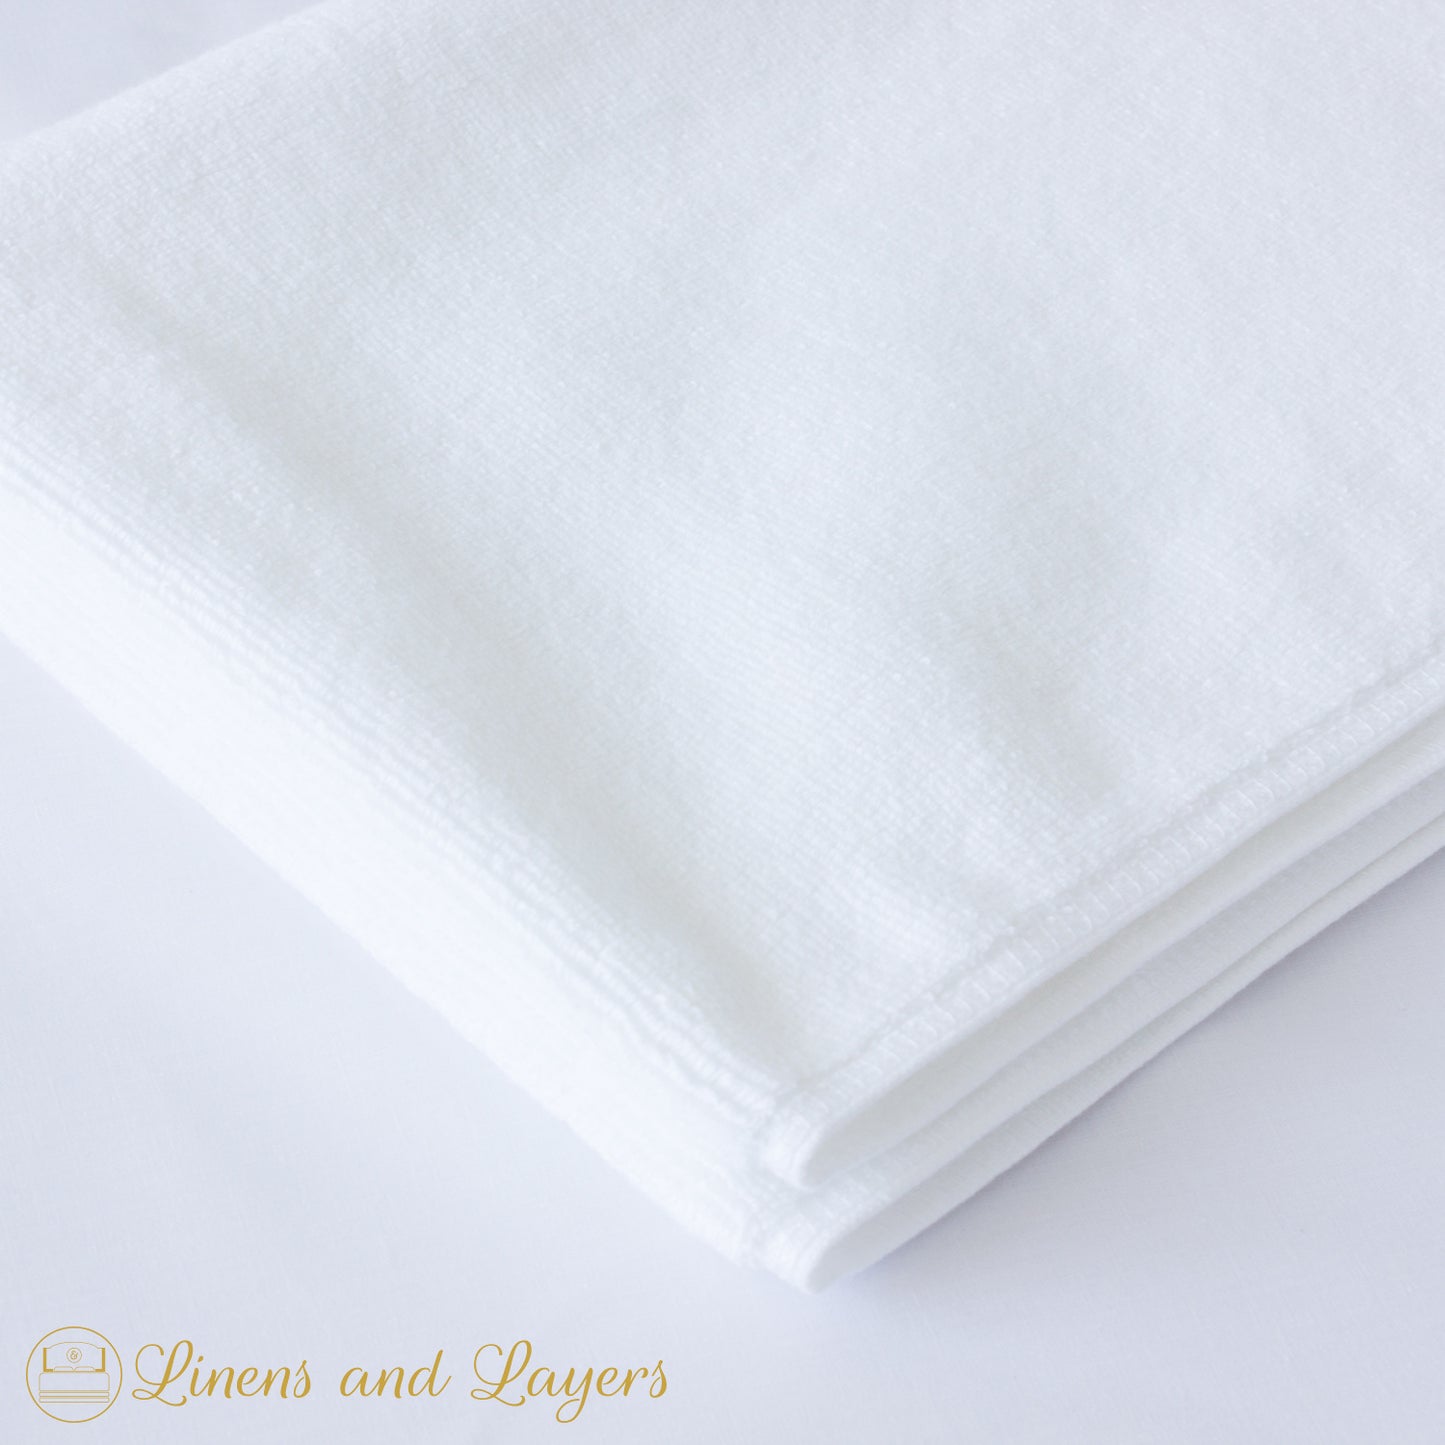 Hotel Quality White Foot Towel / Bath Mat / Floor Towel (775 GSM) - Pure Cotton - 20x30 inches